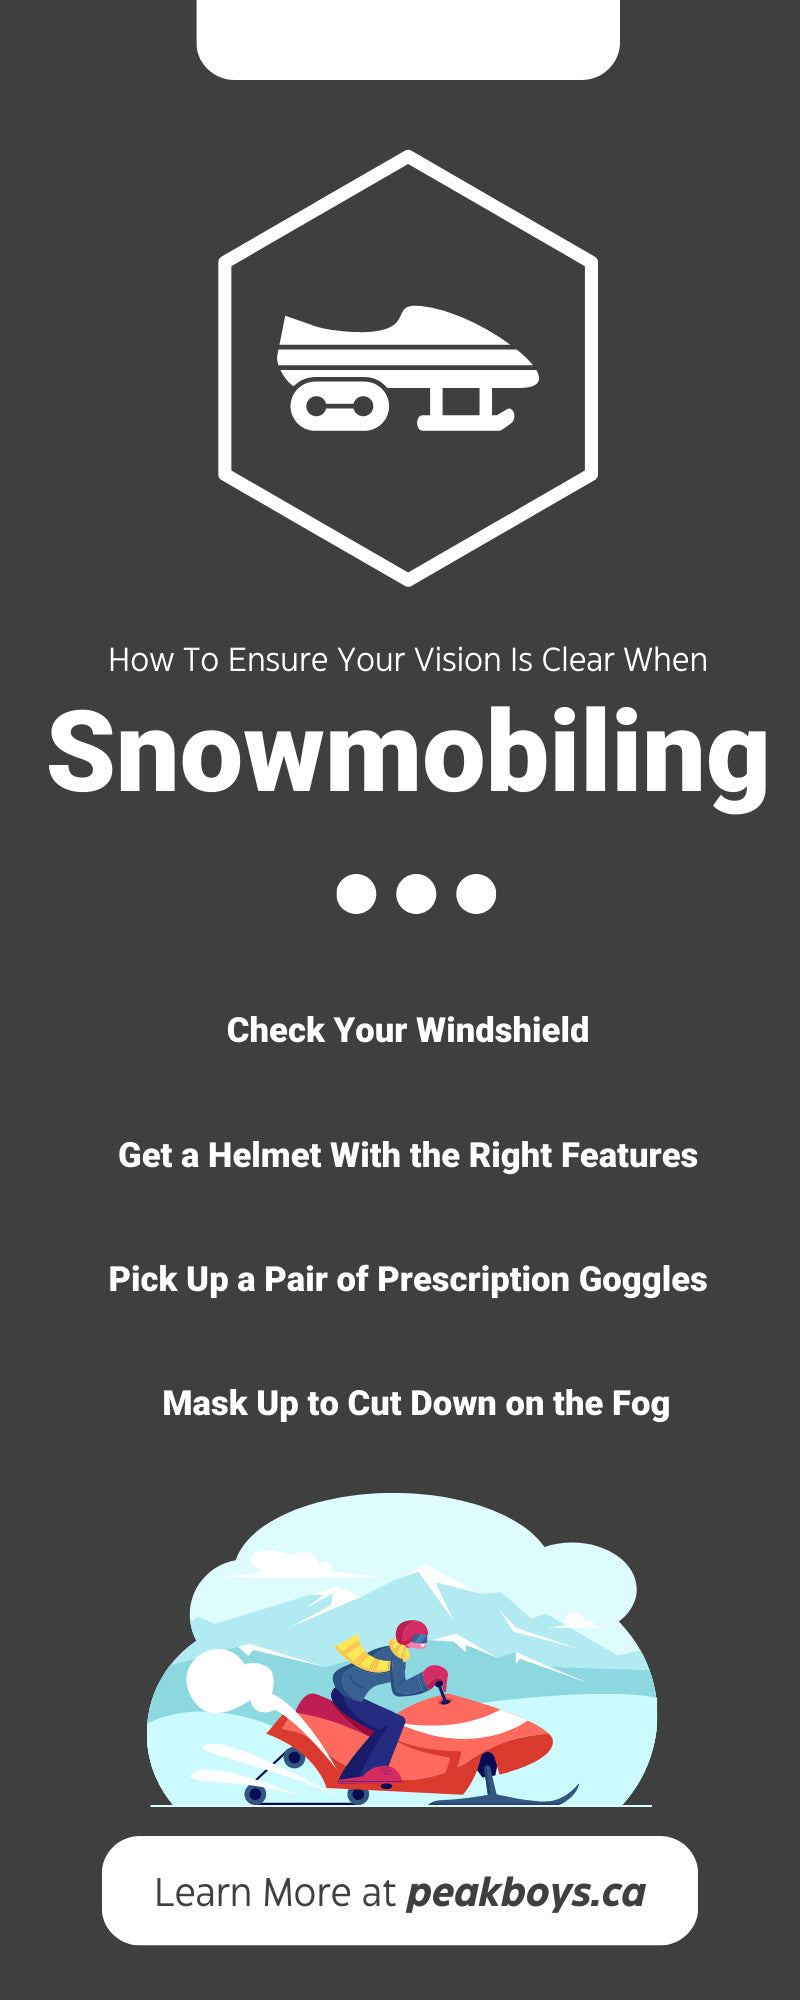 How To Ensure Your Vision Is Clear When Snowmobiling